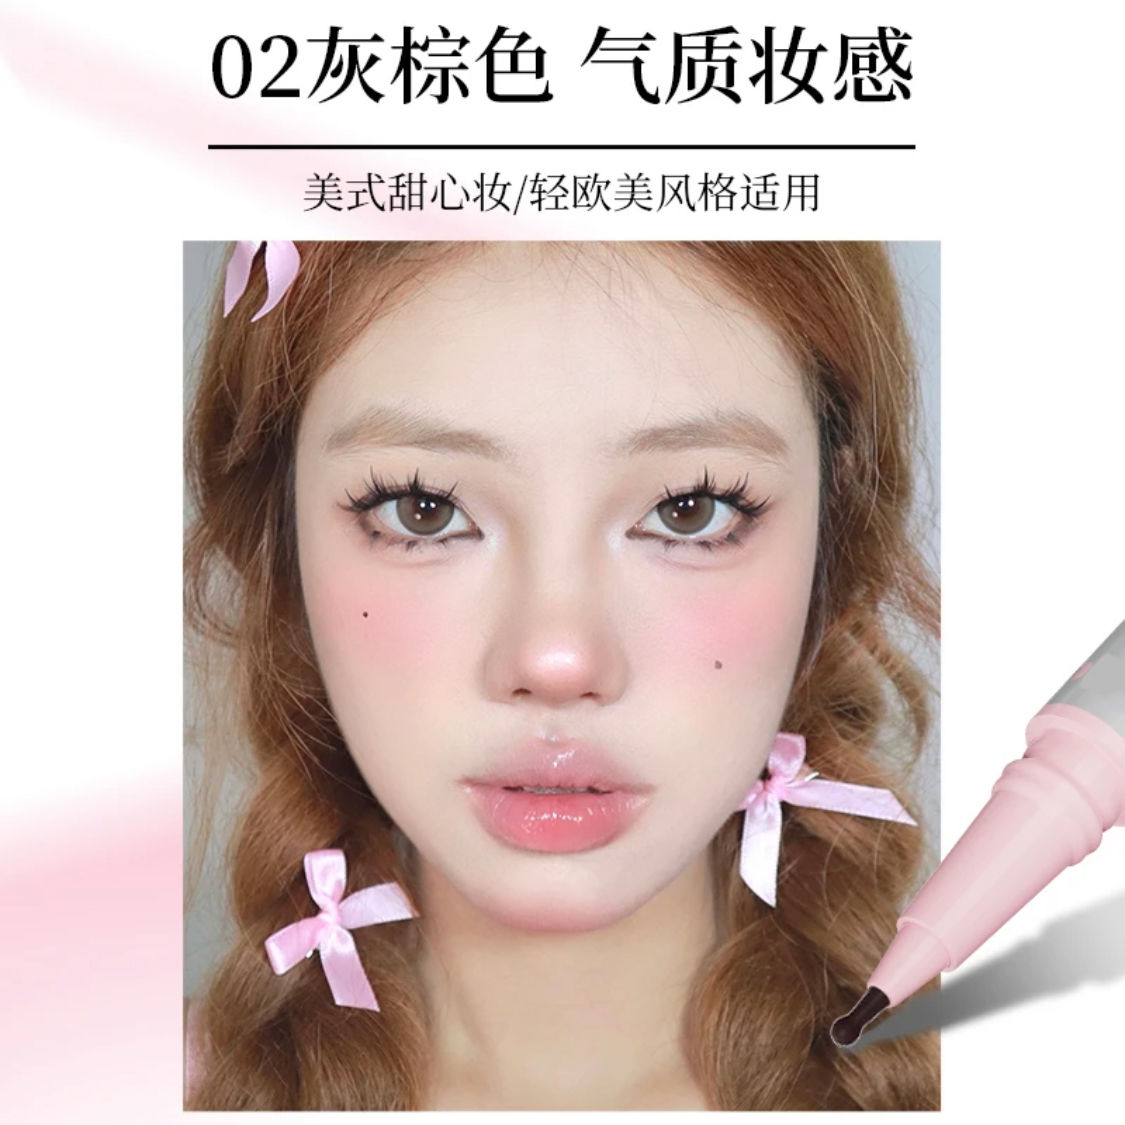 MZYZ spot mole pen tear mole pen is waterproof, long-lasting and does not smudge to modify the corners of the eyes, beauty moles and freckles, natural color development for novices